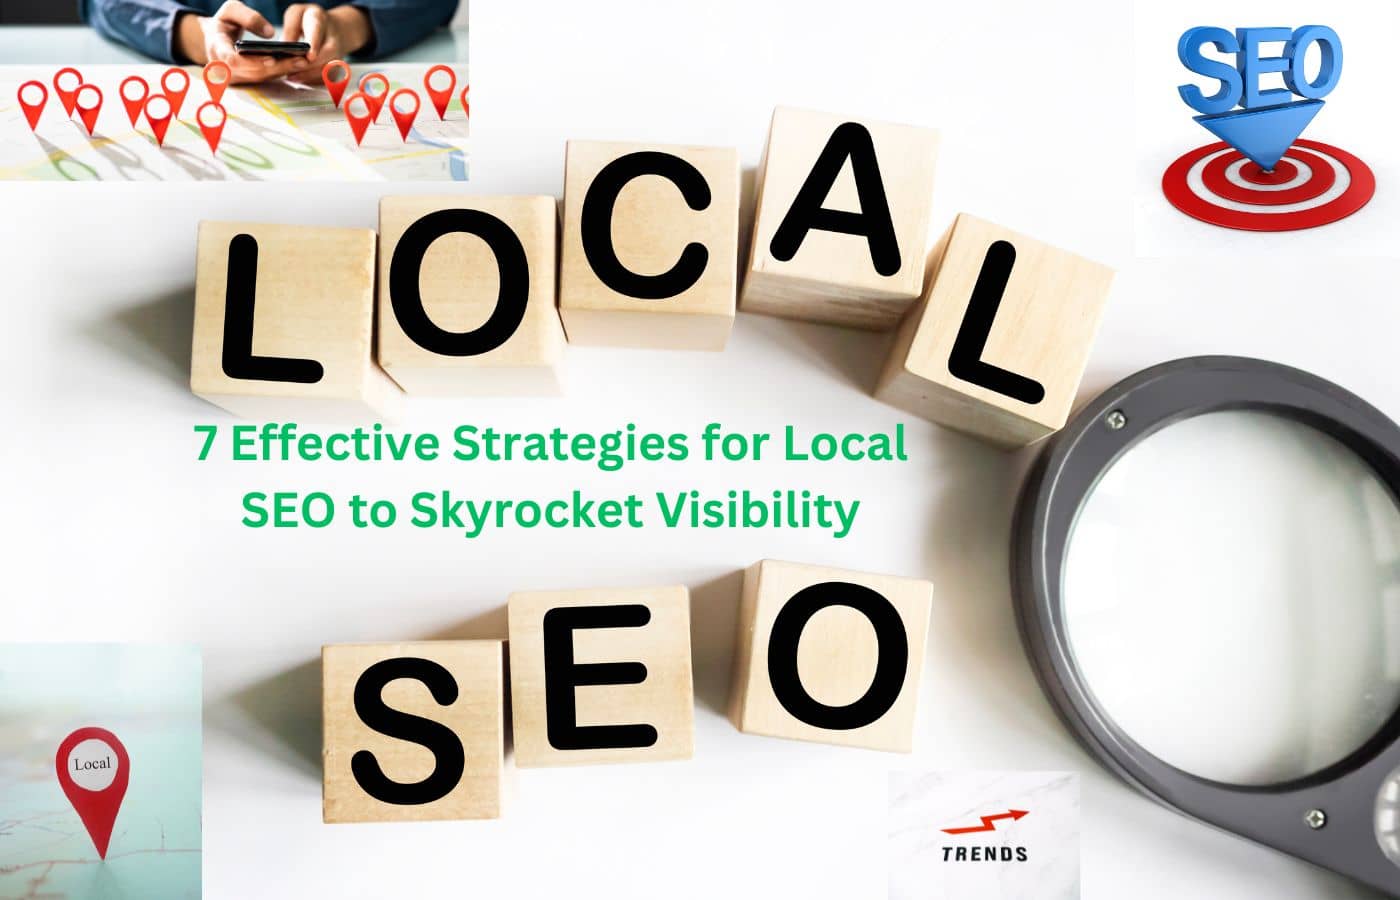 Effective Strategies for Local SEO to Skyrocket Visibility